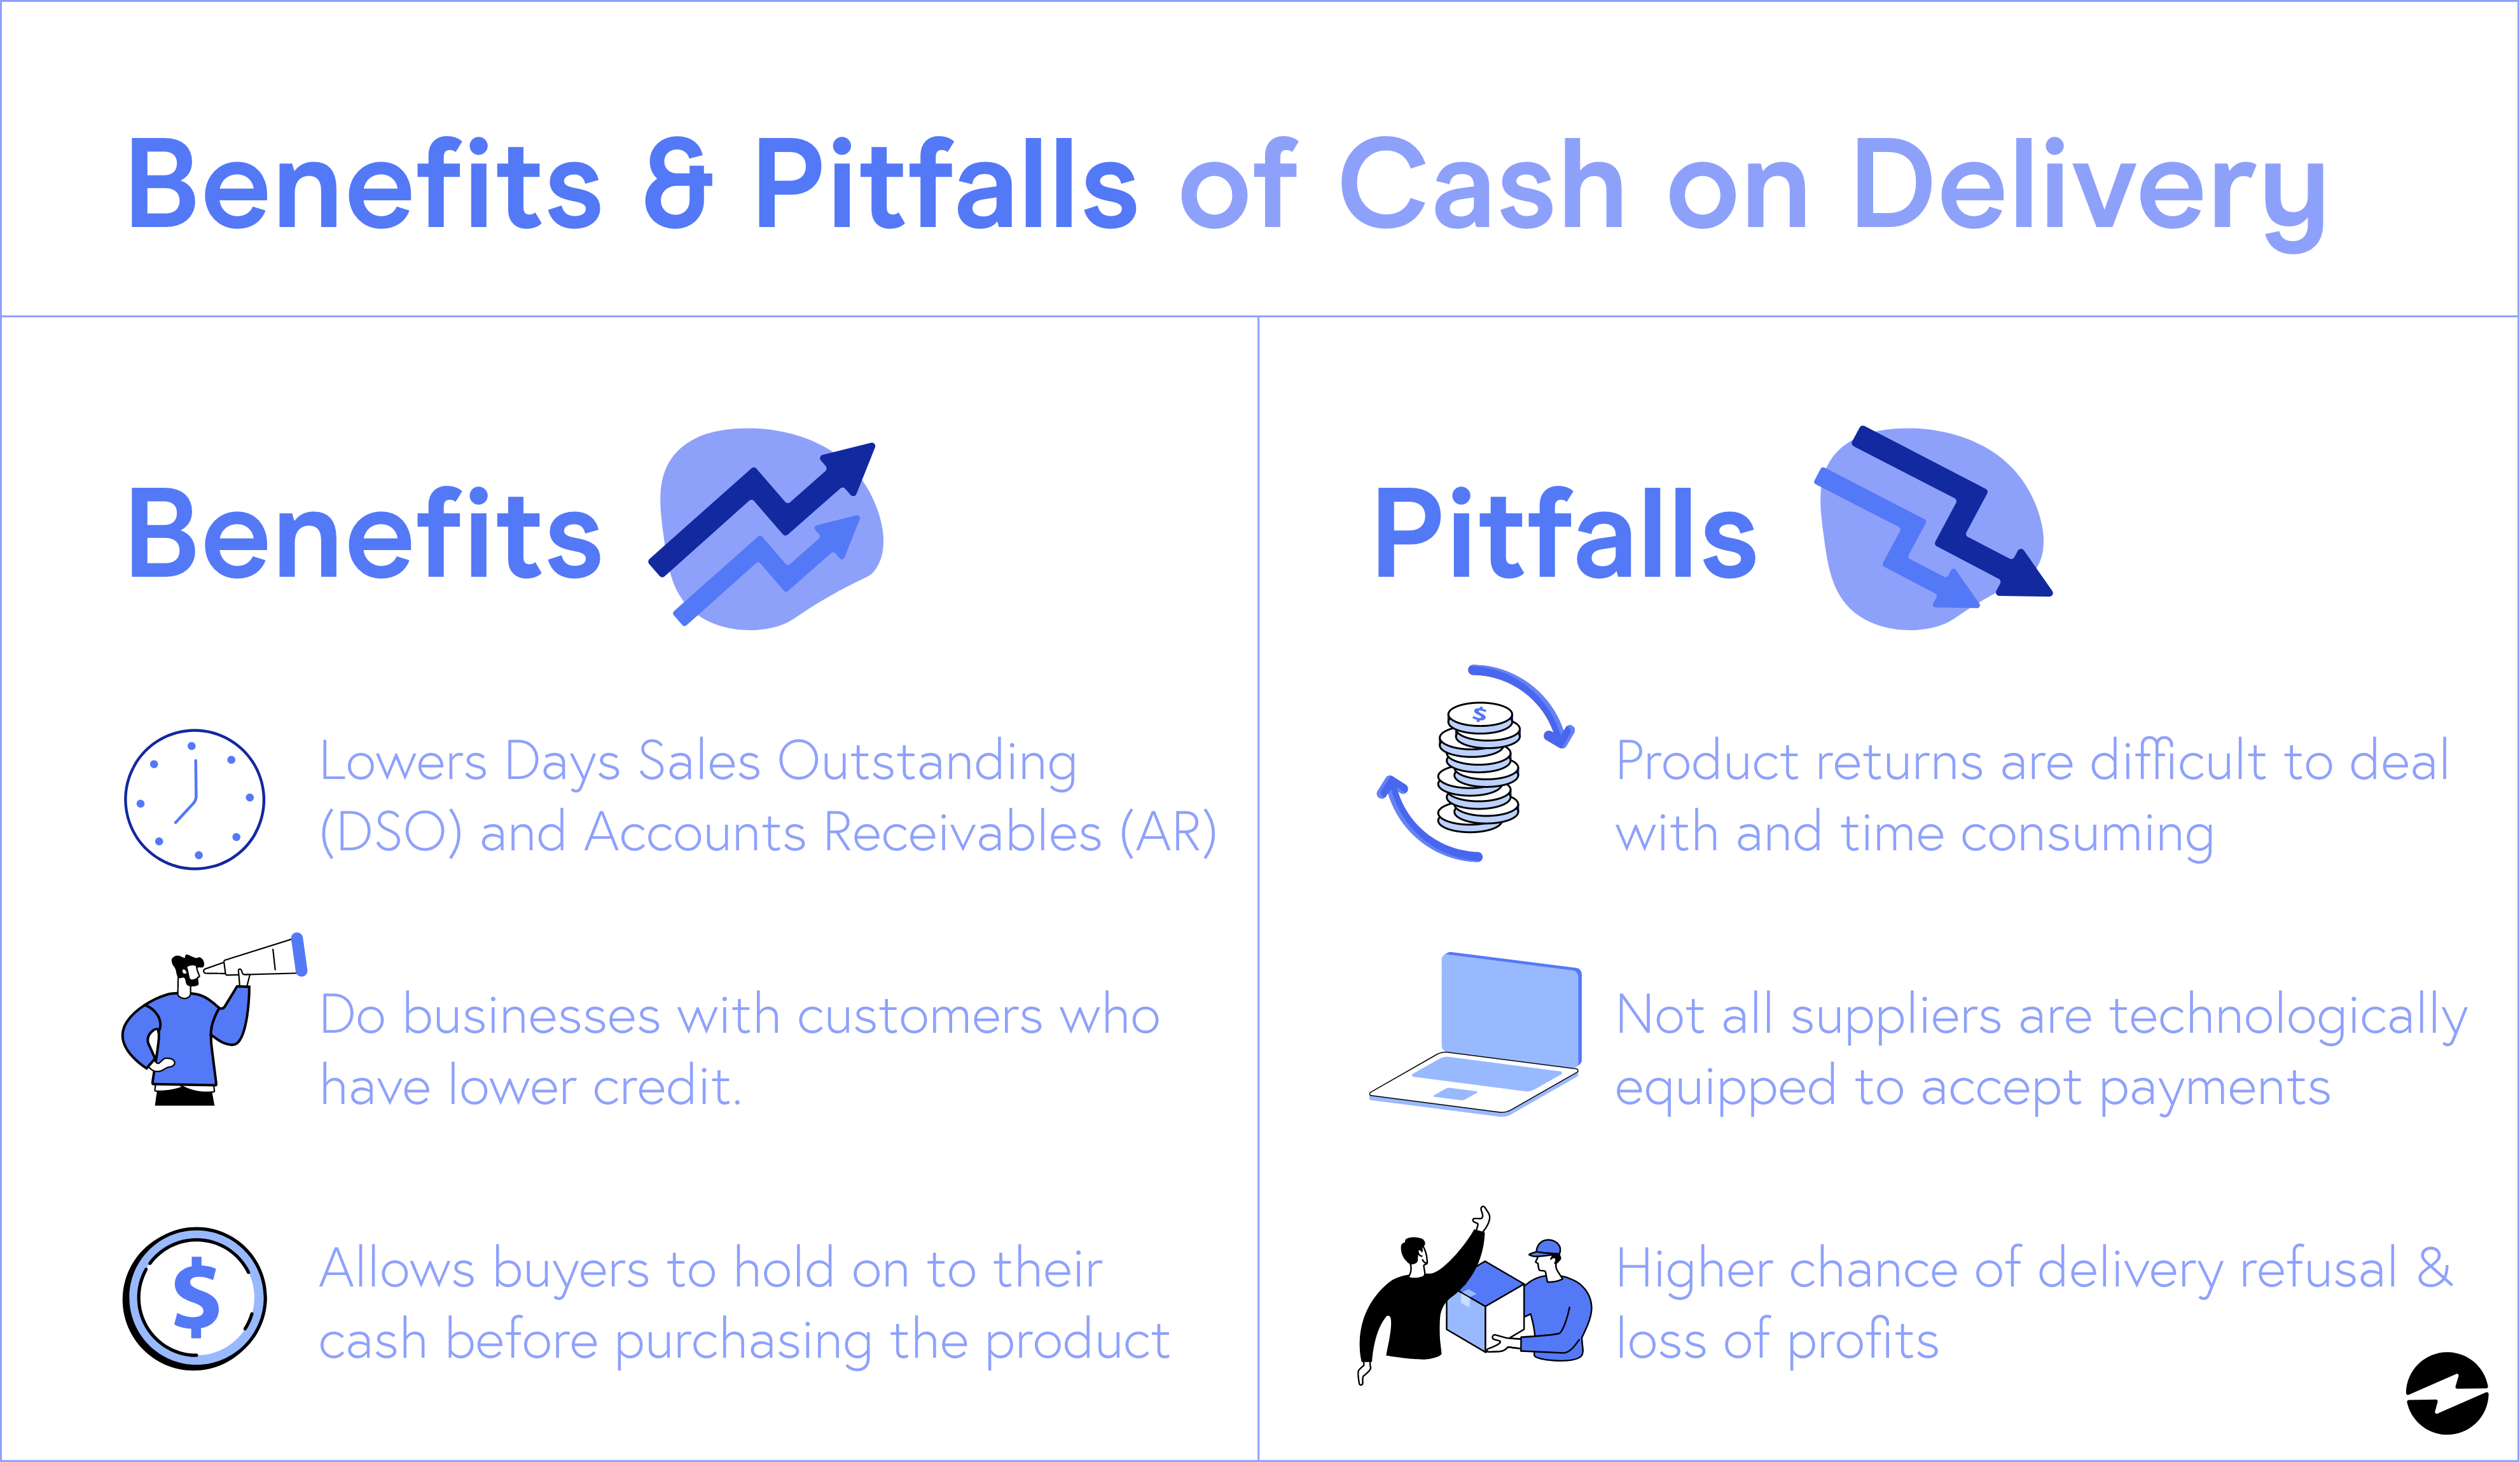 Benefits and Pitfalls of Cash on Delivery